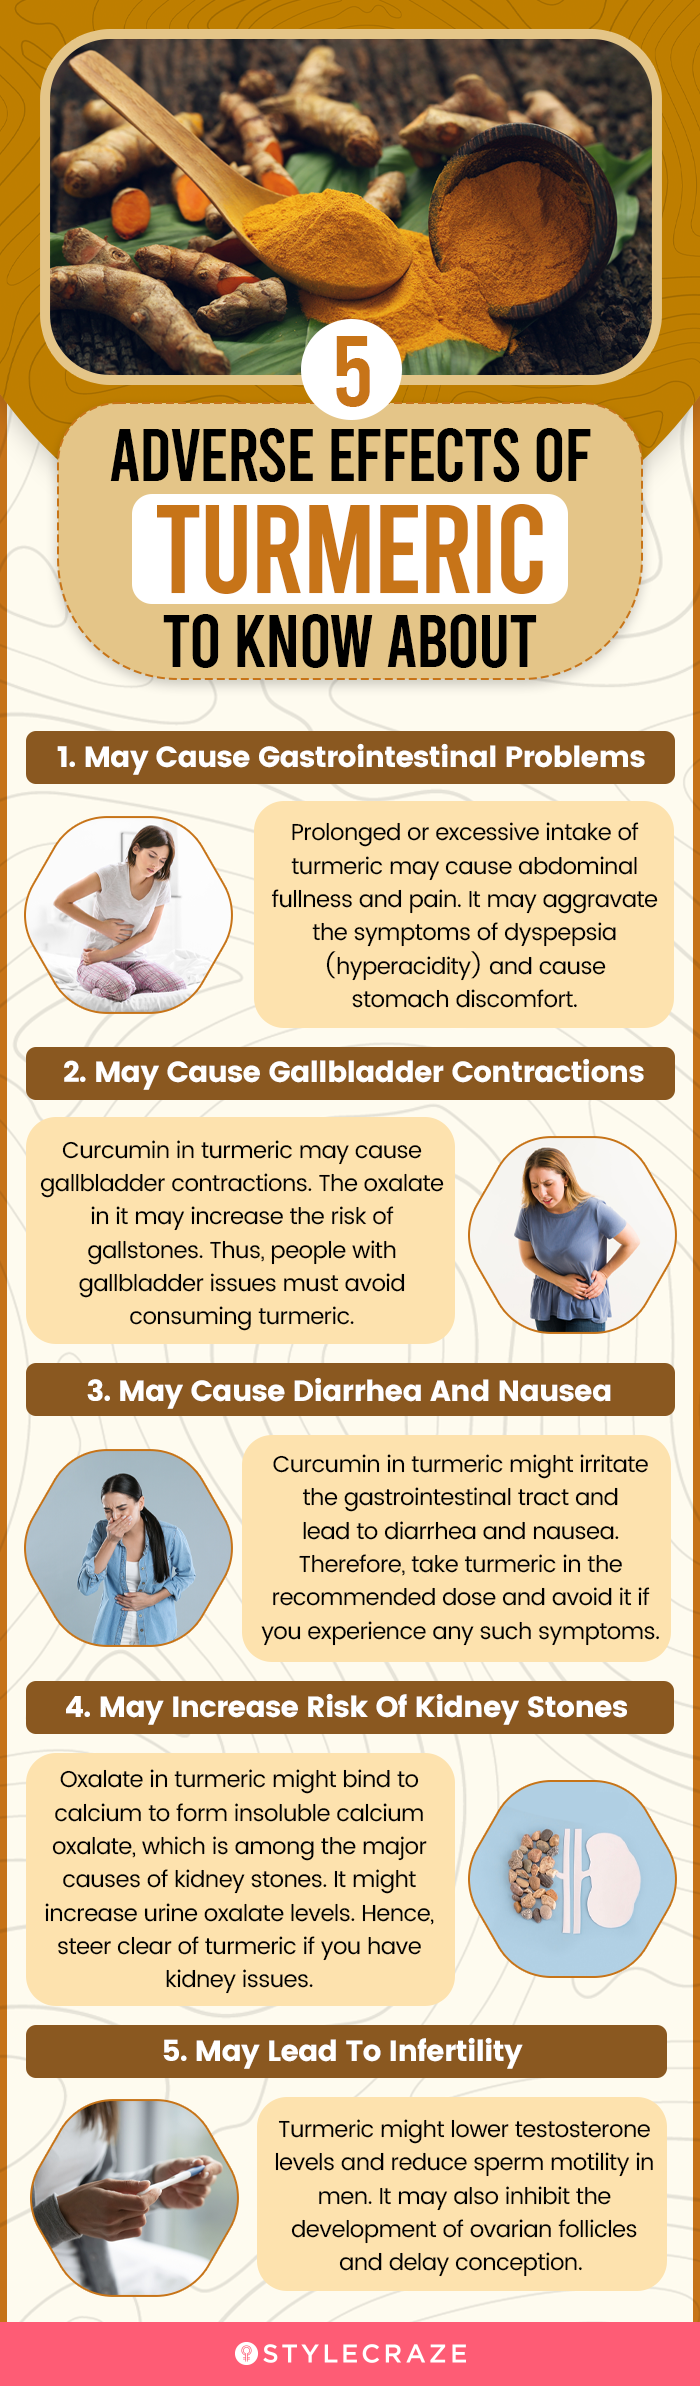 5 adverse effects of turmeric to know about (infographic)